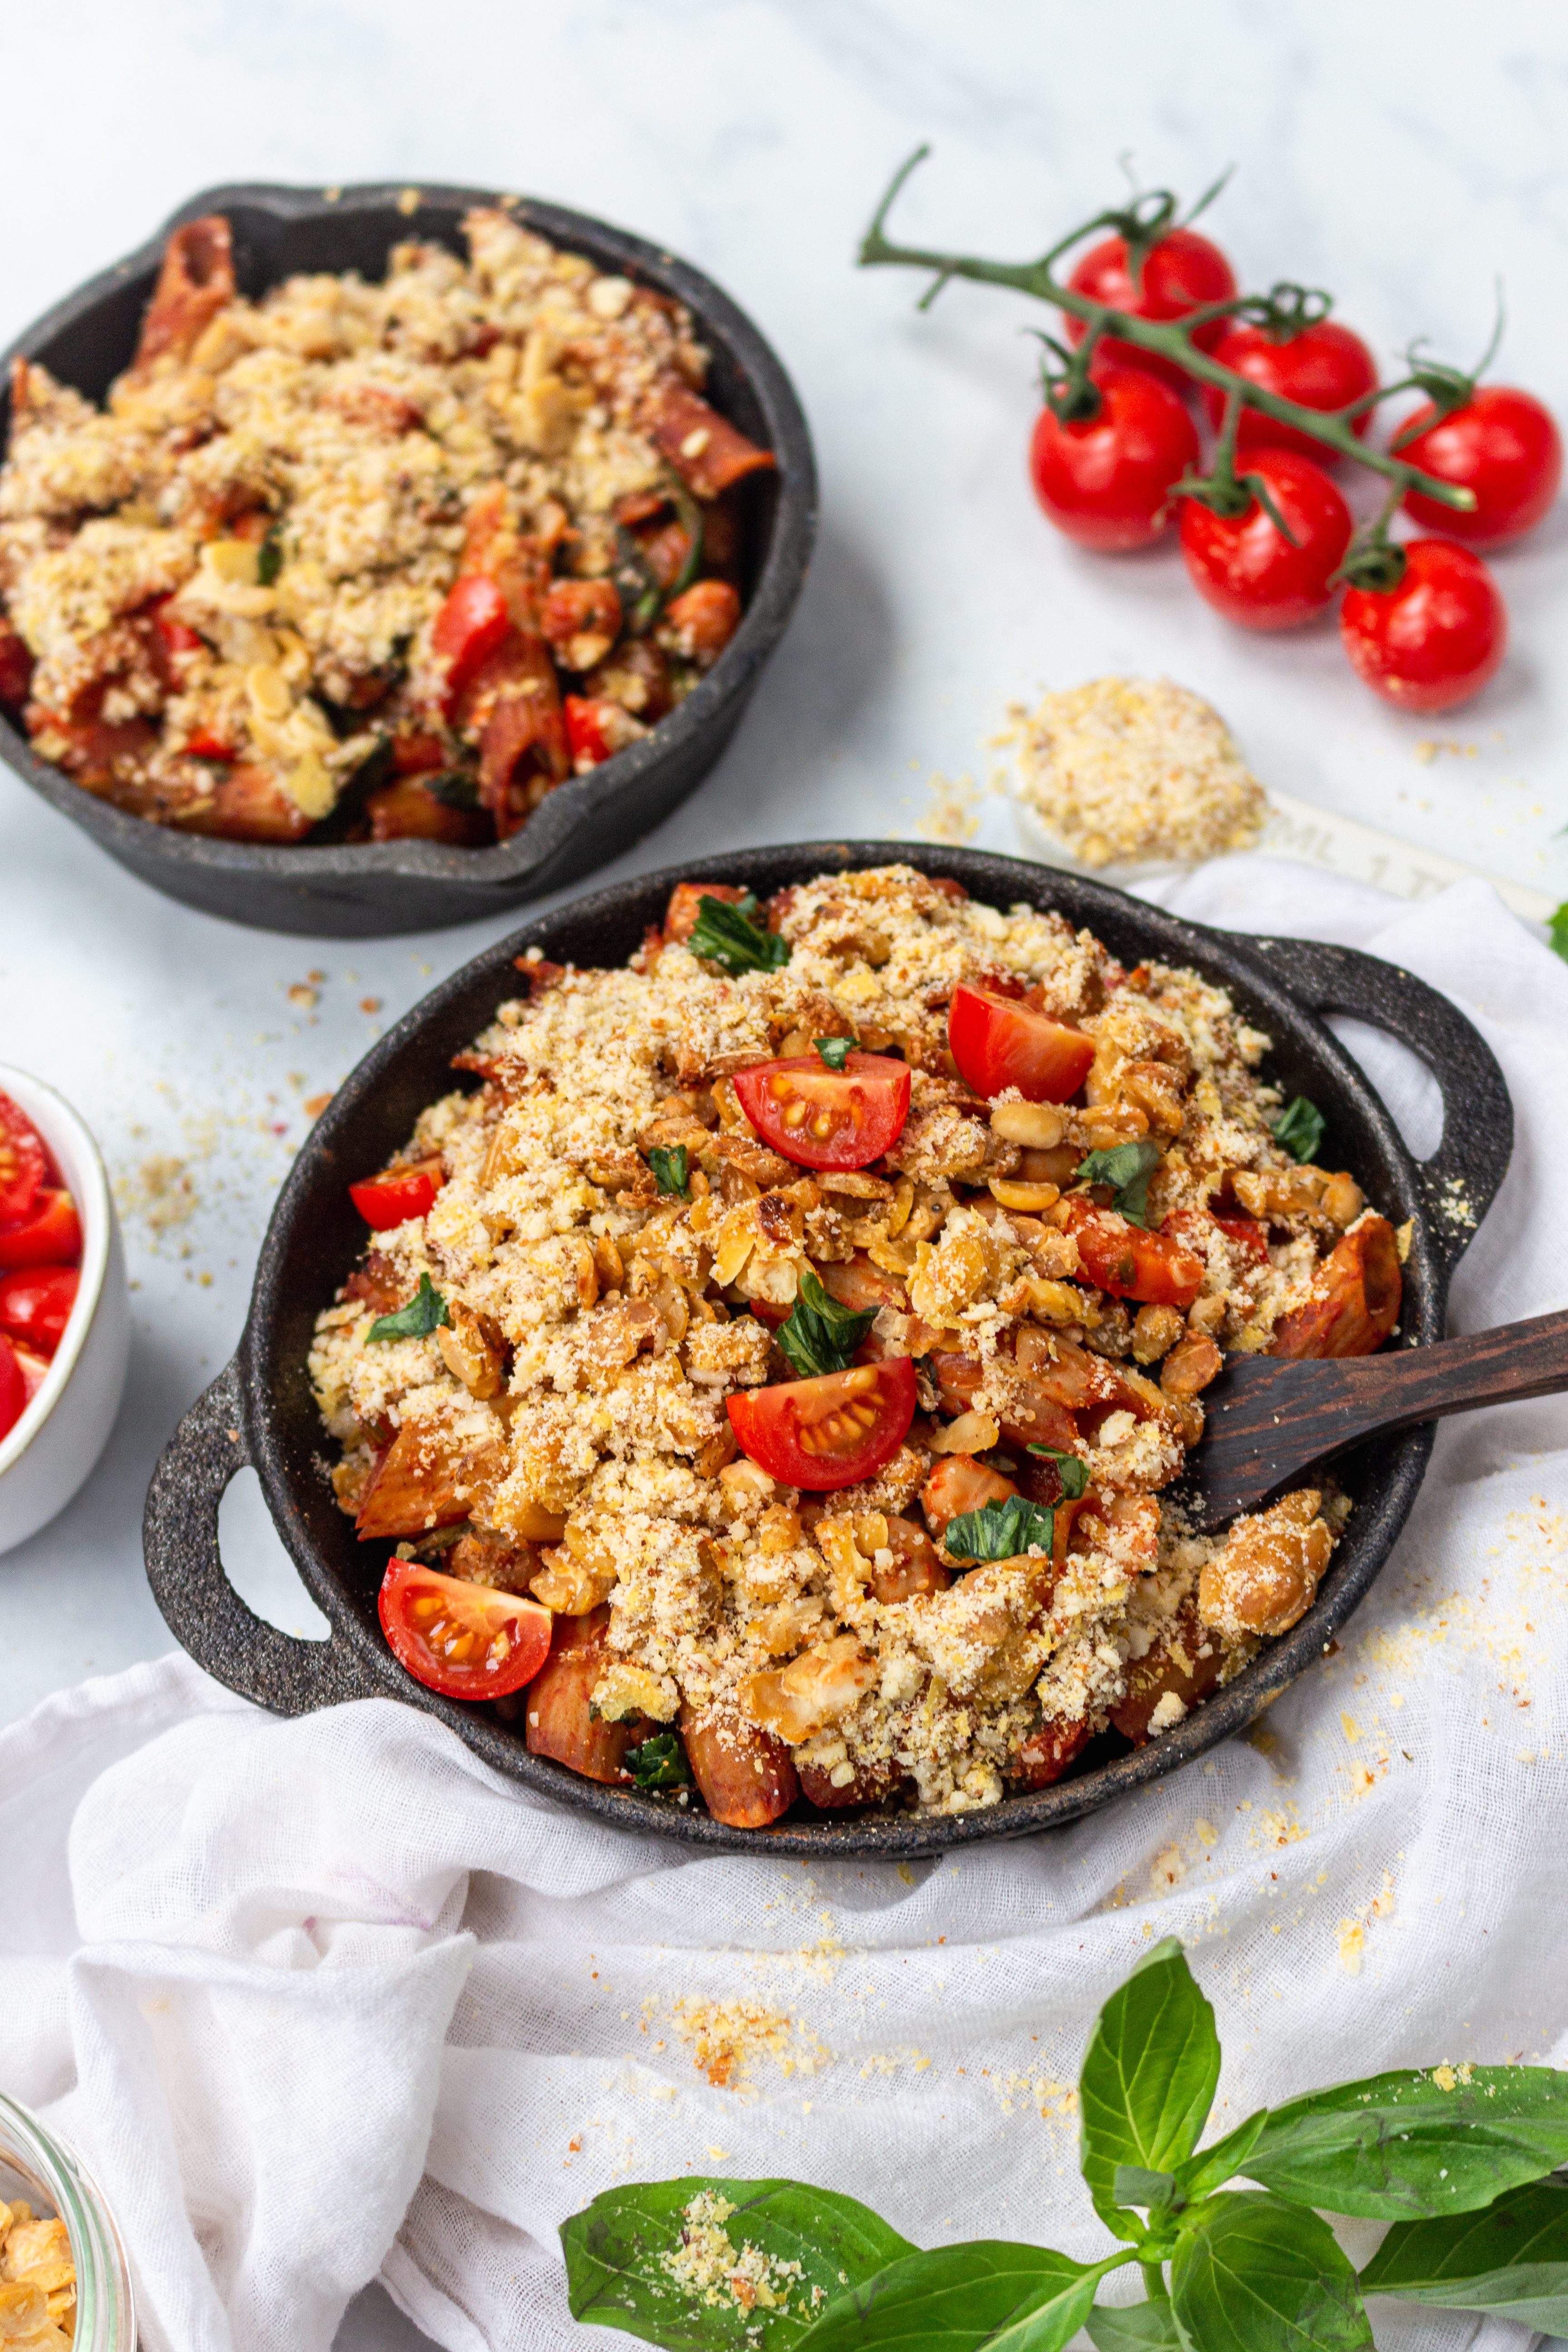 Tomato and Chickpea Pasta Bake with Tempeh Crumble